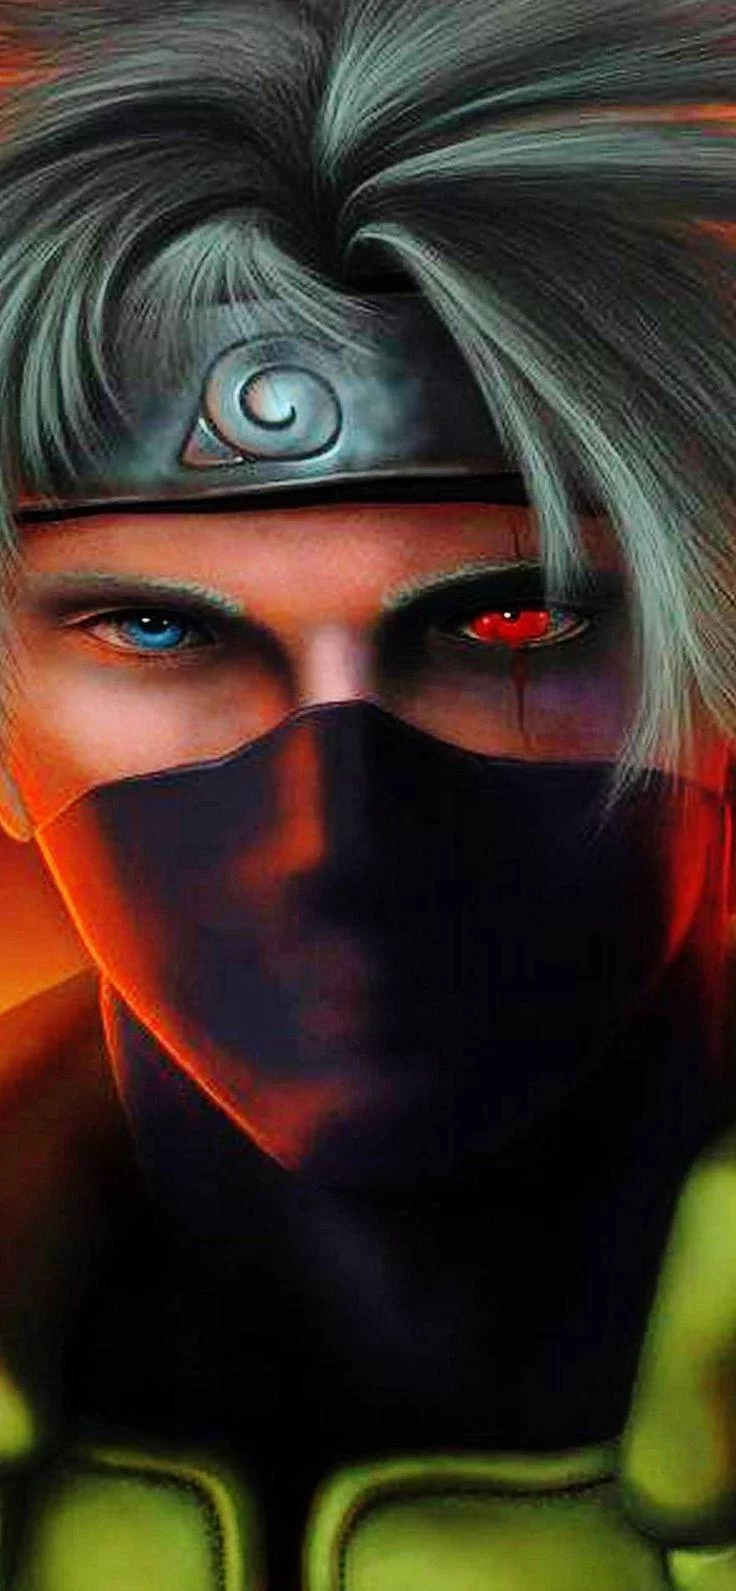 Free Download Zedge Wallpaper Android Naruto Page 2110426 (736 x 1591)